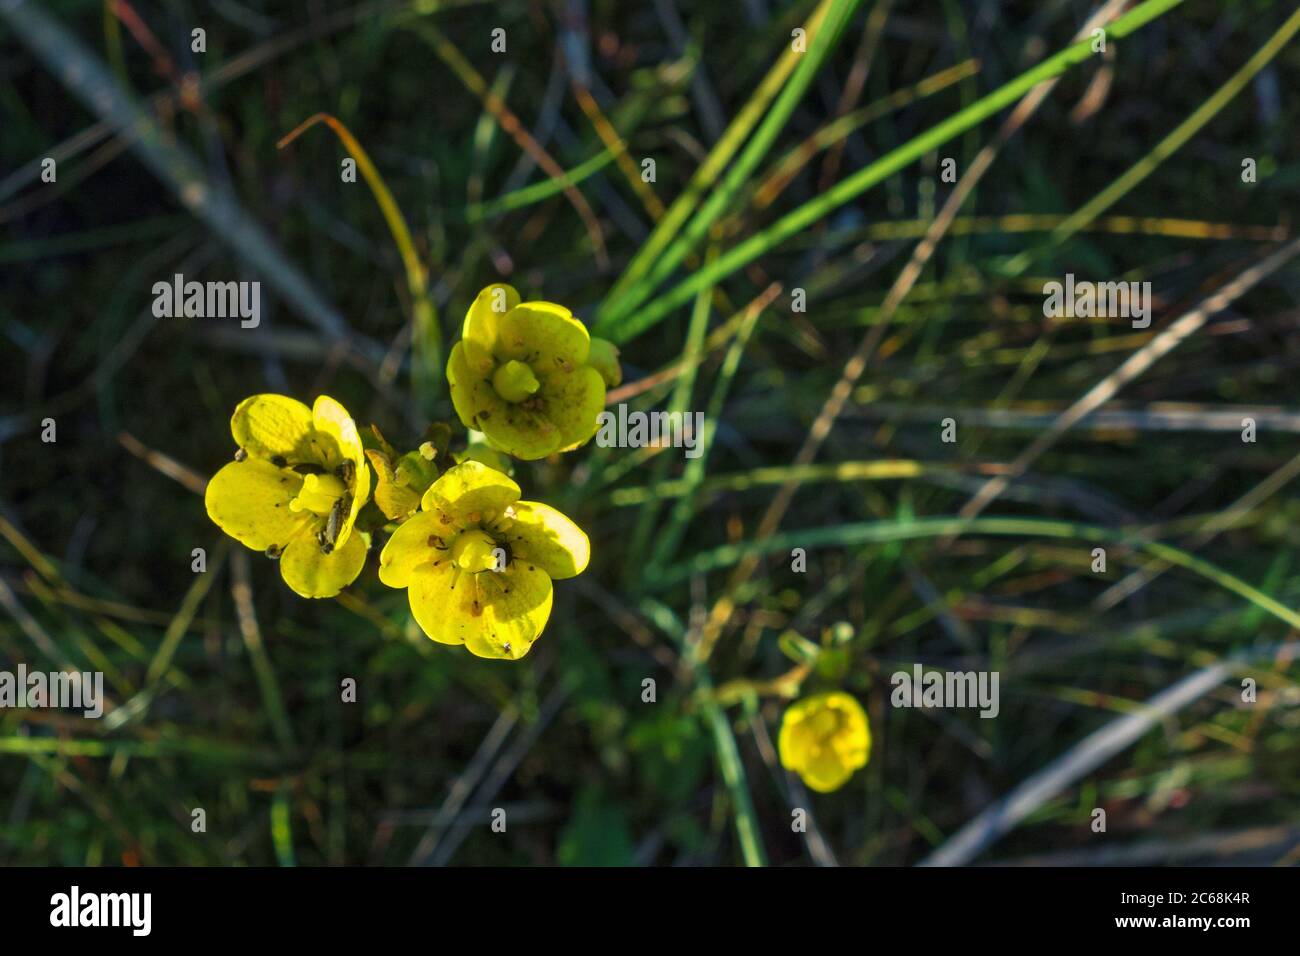 Marsh saxifrage on a summer meadow Stock Photo